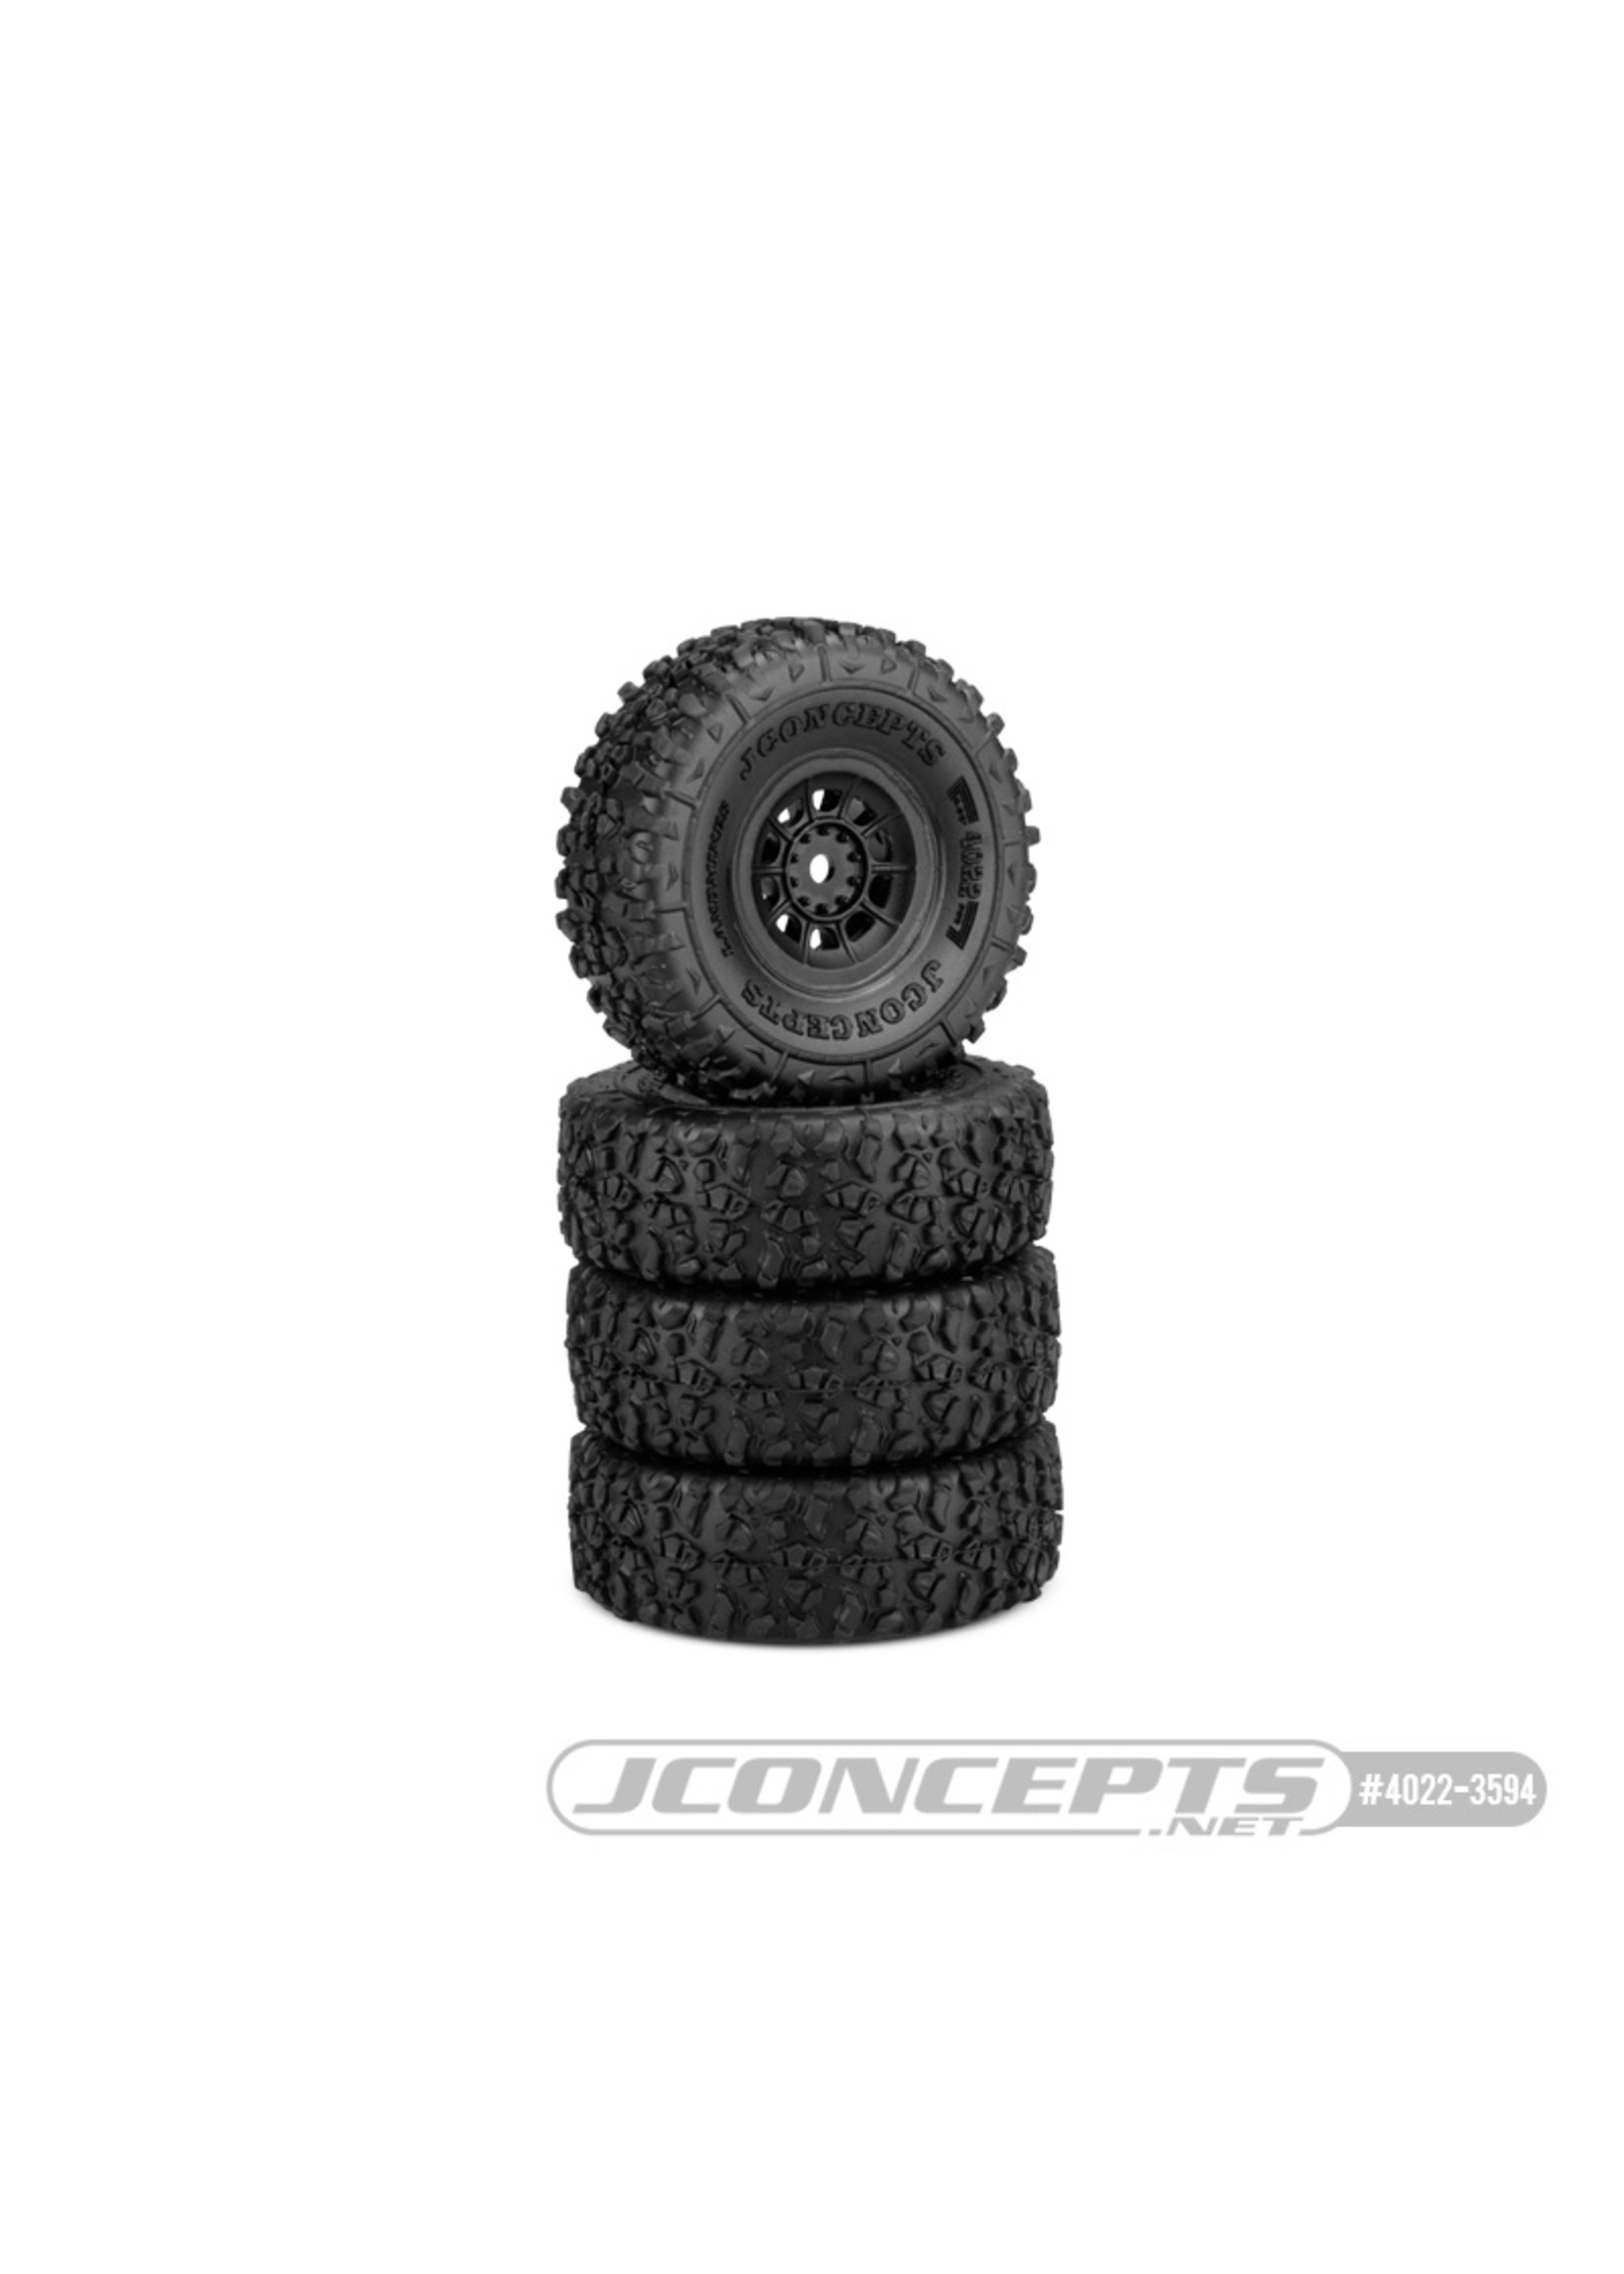 JConcepts 4023-3594 - Tusk 1.0",  Pre-Mounted SCX24